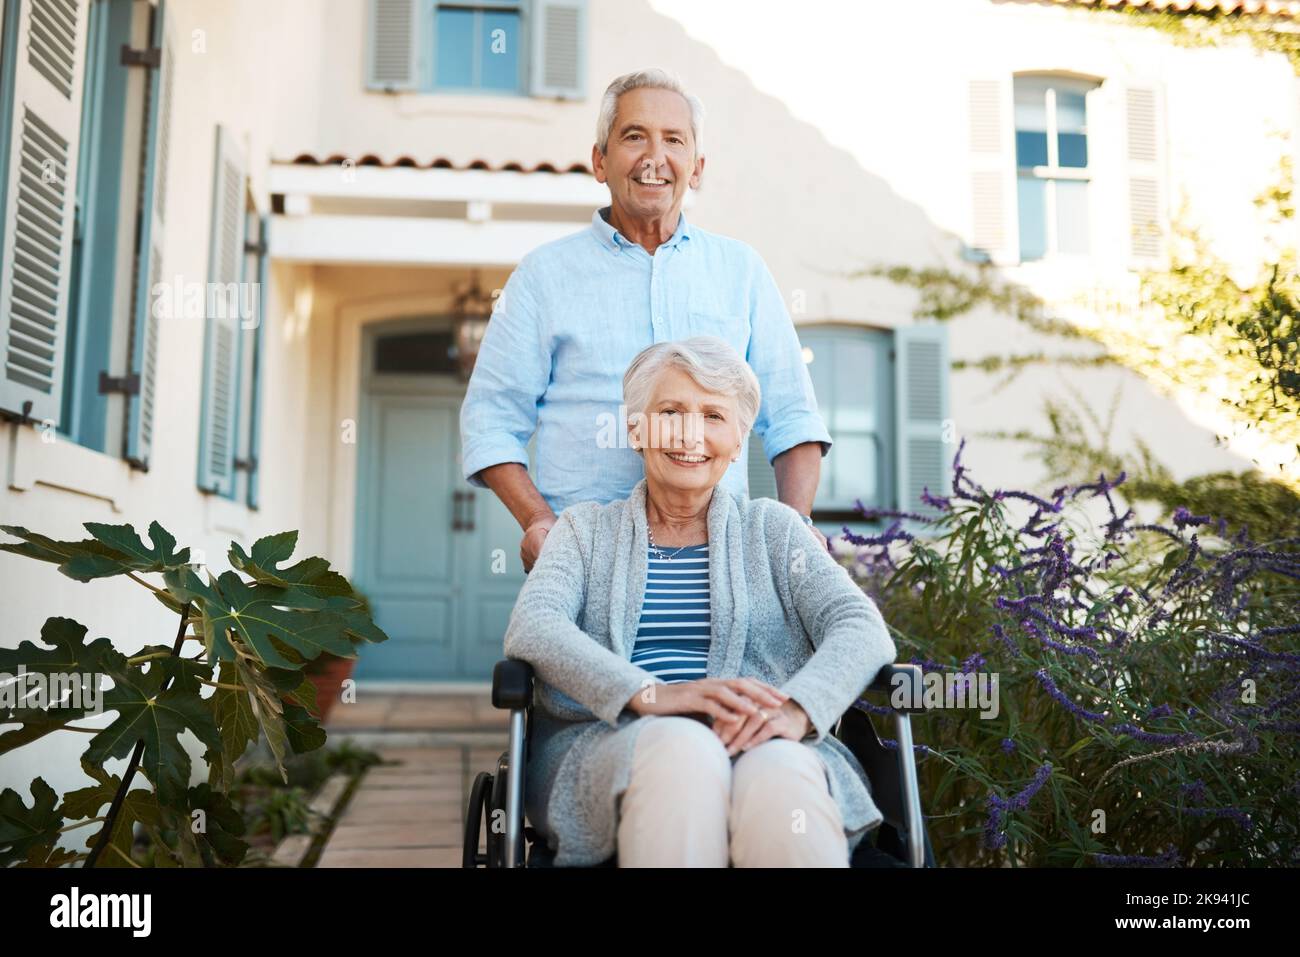 We stuck together through thick and thin. Portrait of a cheerful wheelchair bound senior woman relaxing with her husband in their backyard at home. Stock Photo